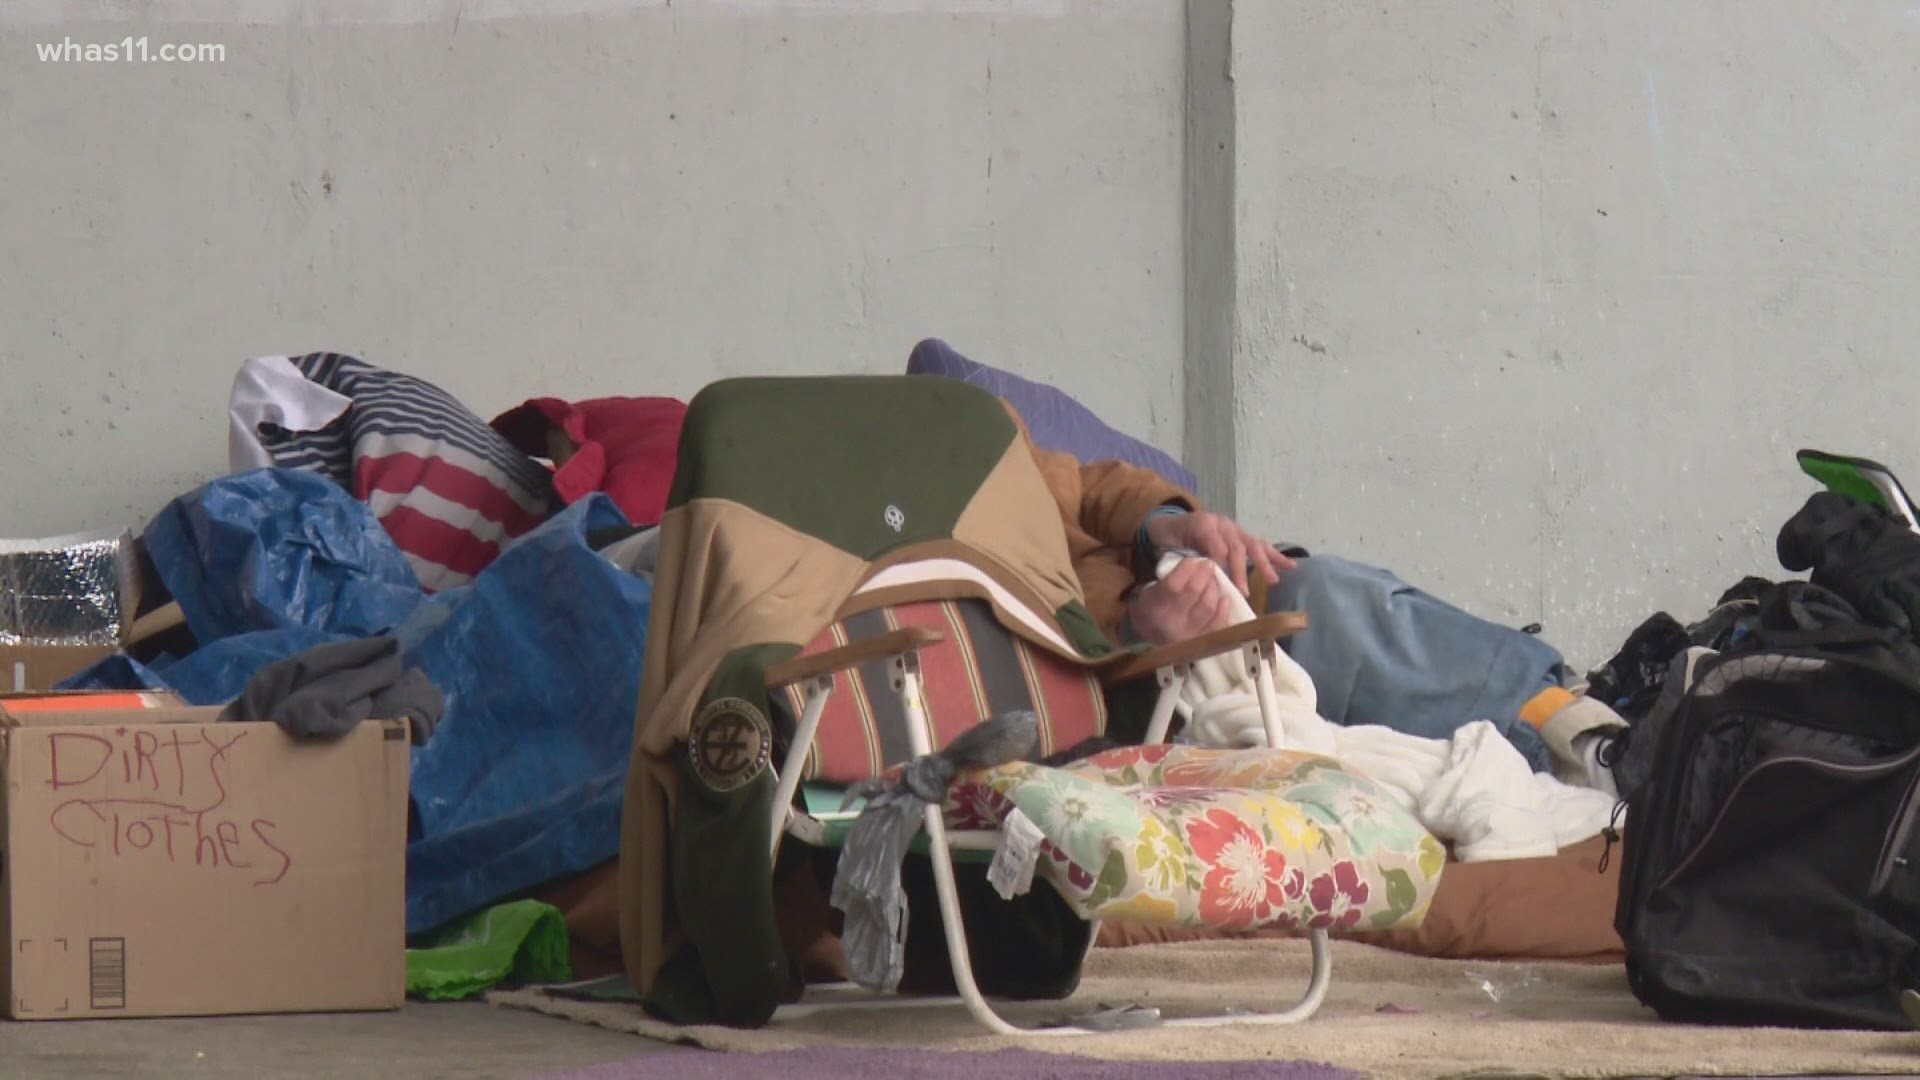 According to Paul Stensrud, this past year has left the homeless of Southern Indiana with few options on where to go when it is cold.